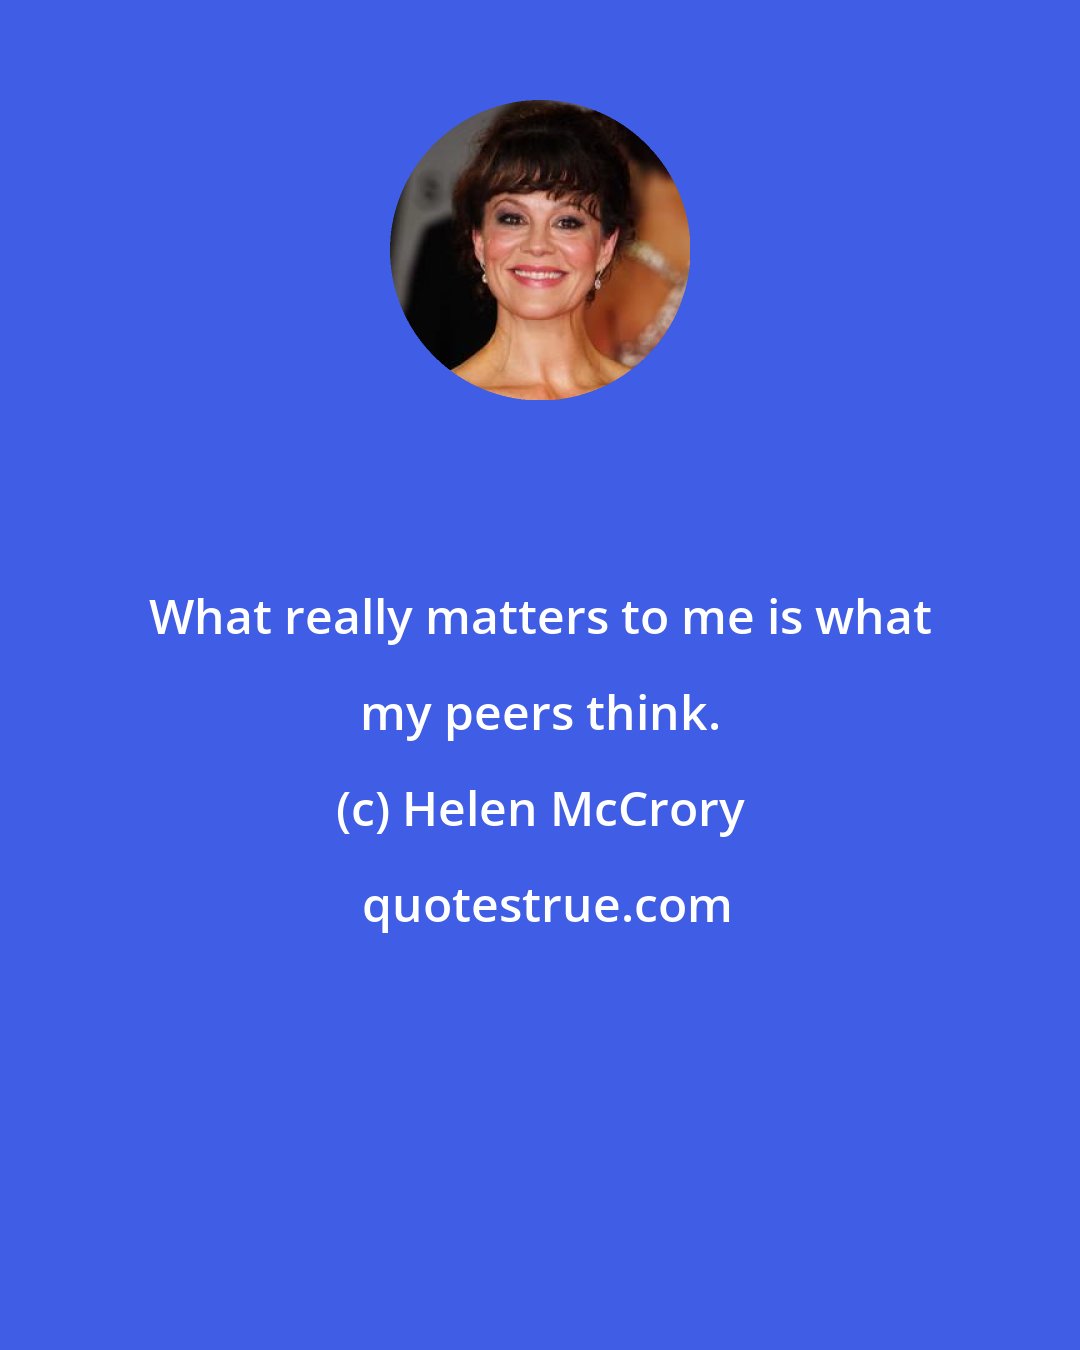 Helen McCrory: What really matters to me is what my peers think.